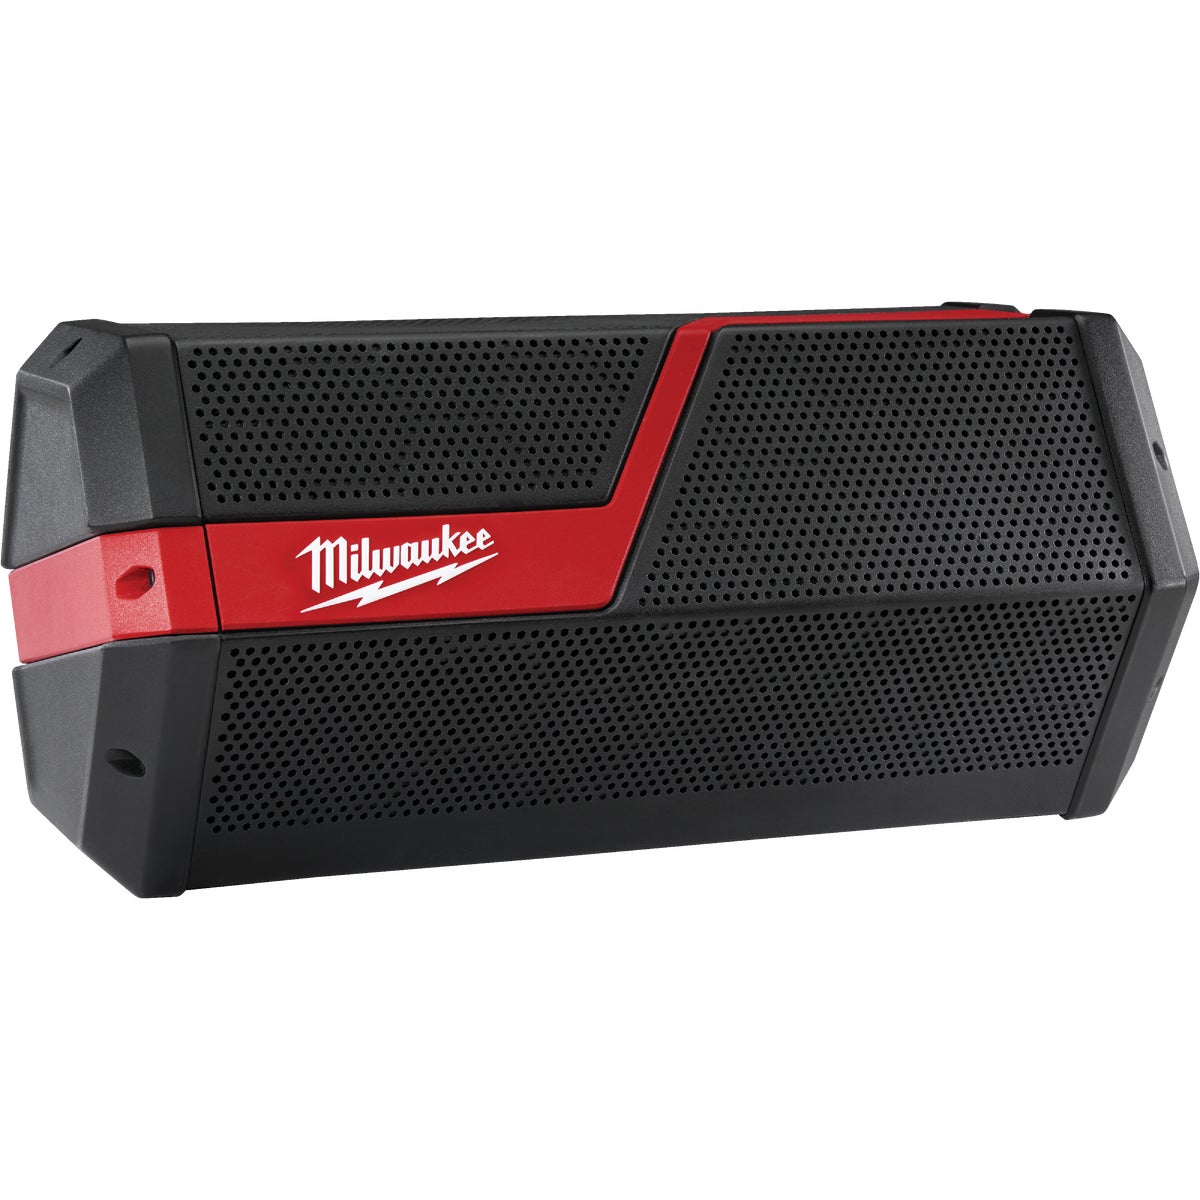 Item 303420, M18/M12 wireless job site speaker delivers clear and loud sound on or off 